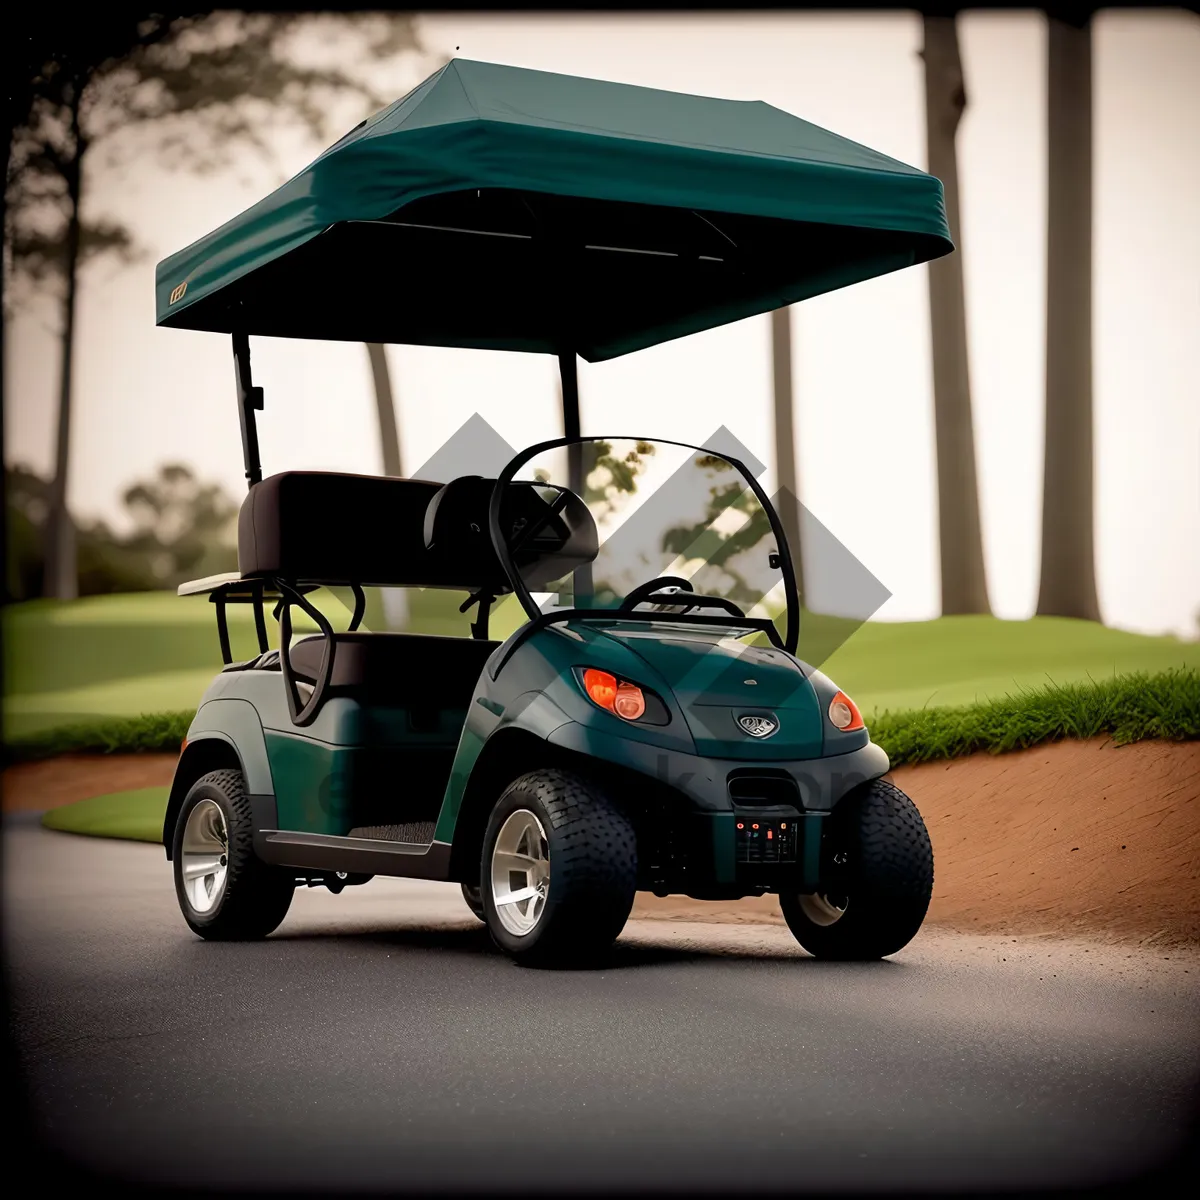 Picture of Golf Cart on Green Course